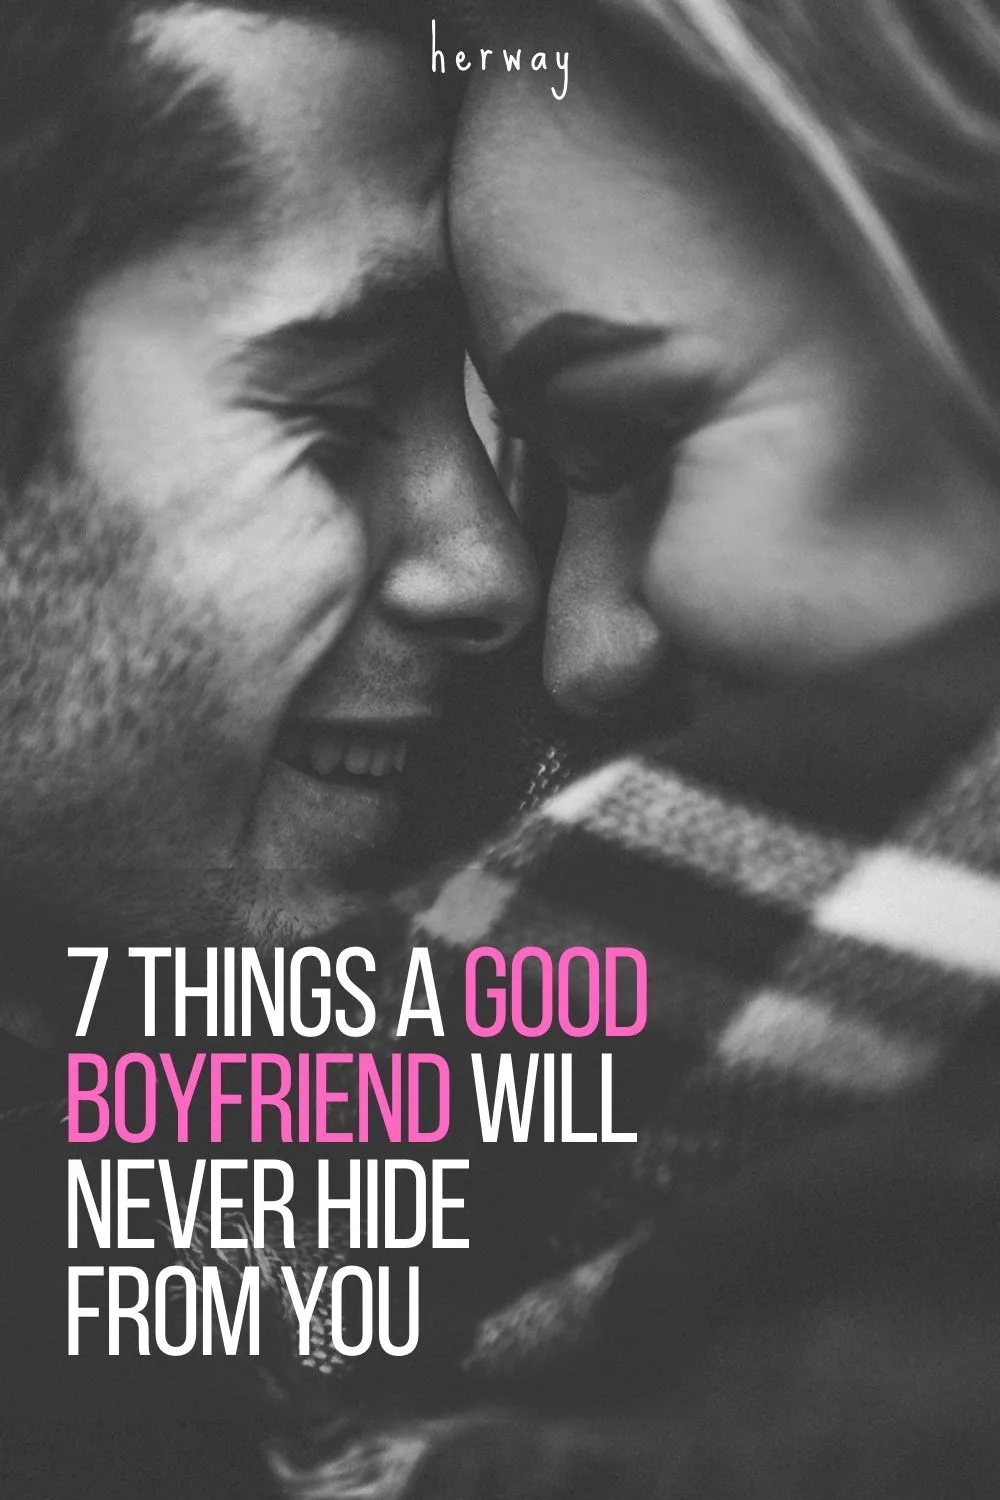 7 Things A Good Boyfriend Will Never Hide From You